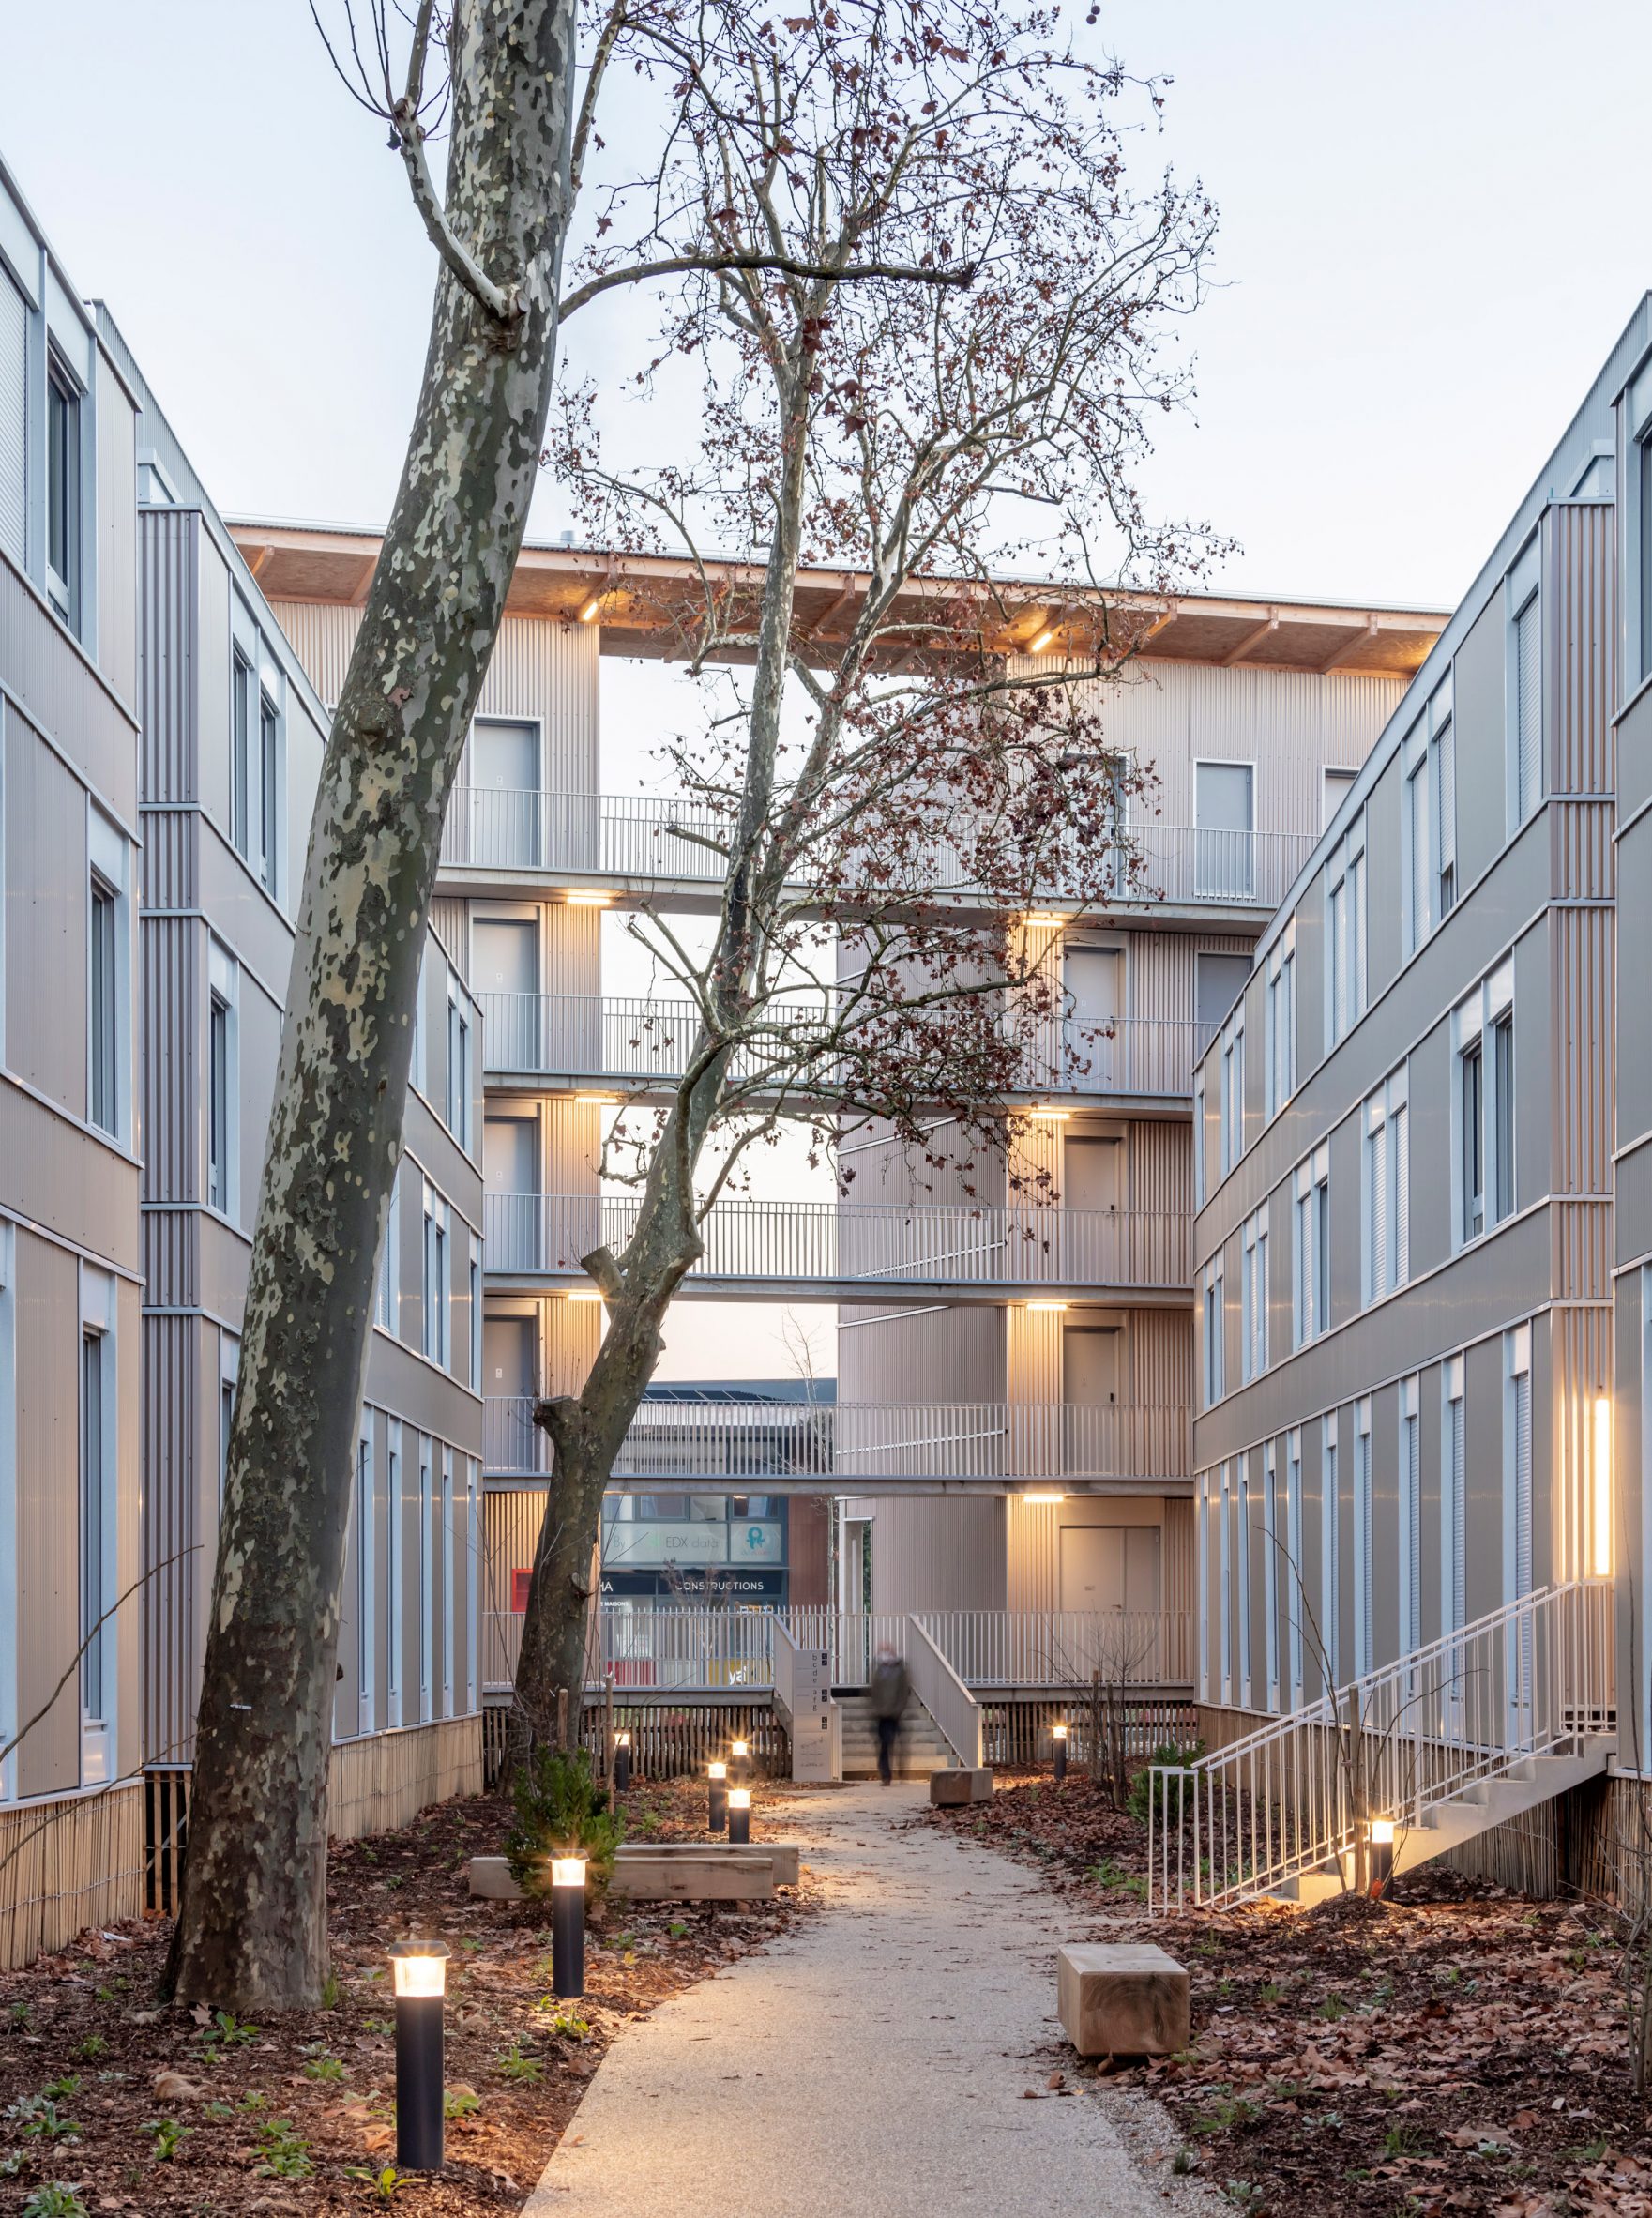 Courtyard view within student housing in France